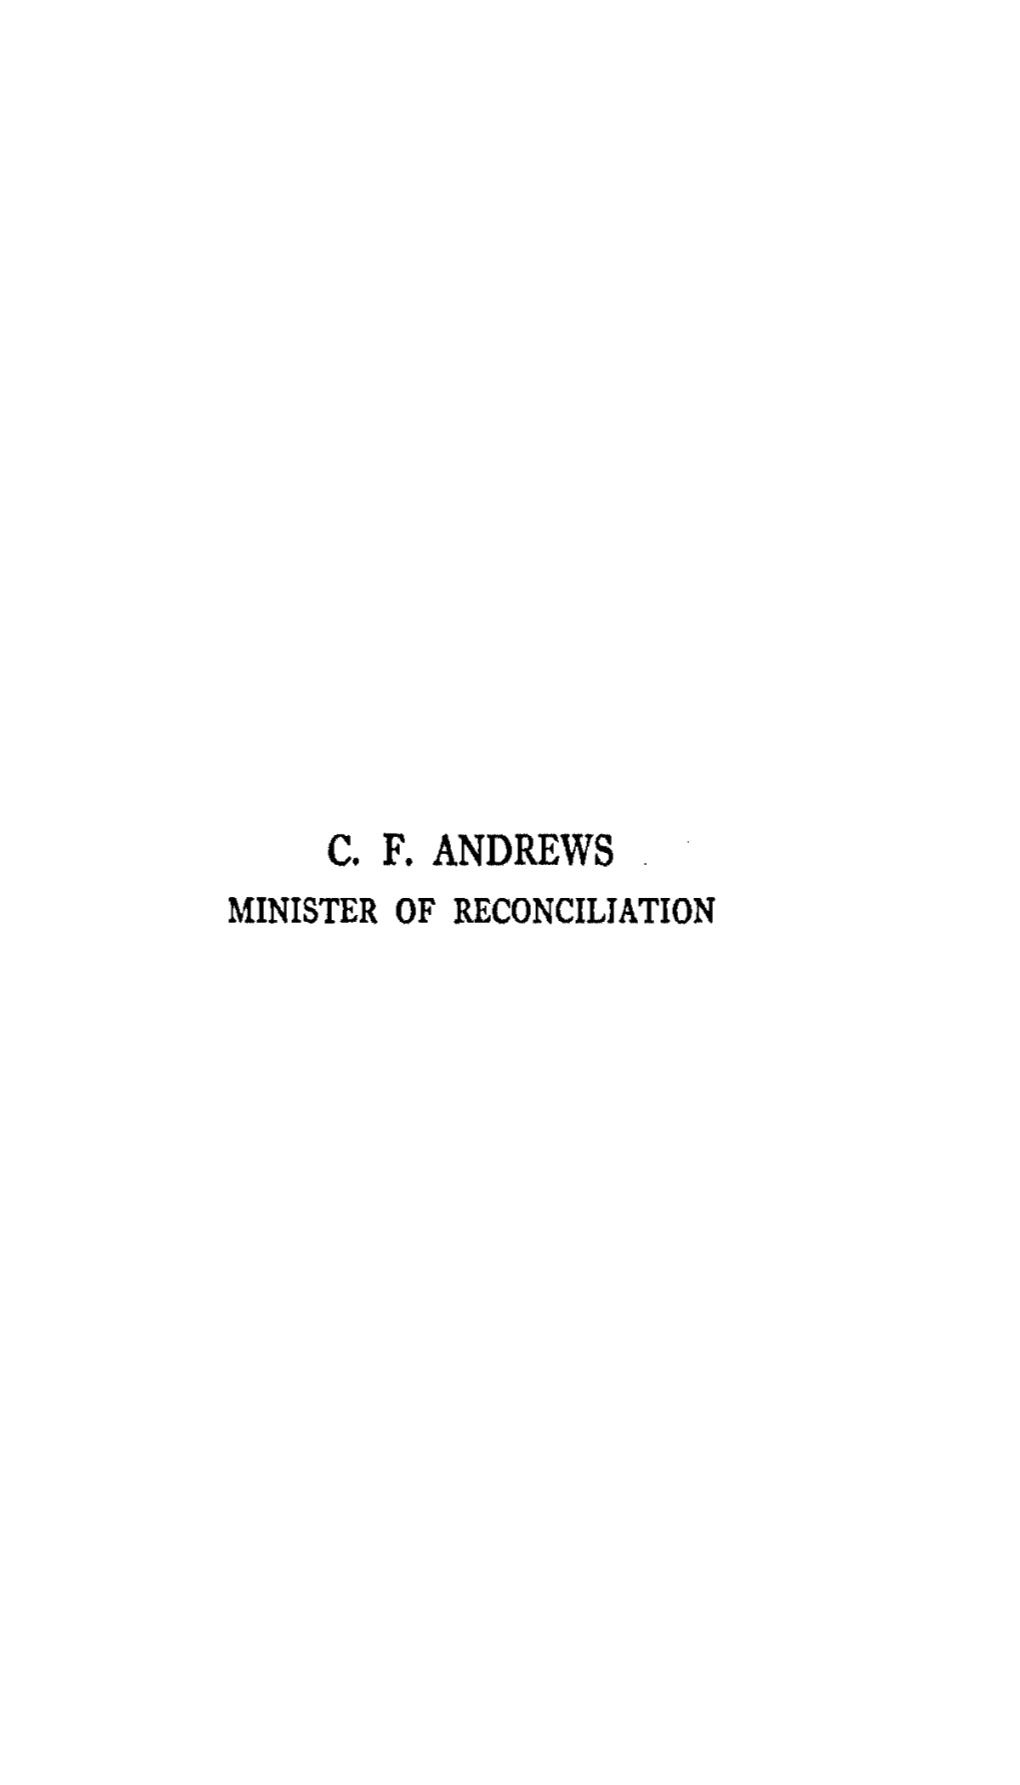 C. F. ANDREWS MINISTER of RECONCILIATION by the Same Author